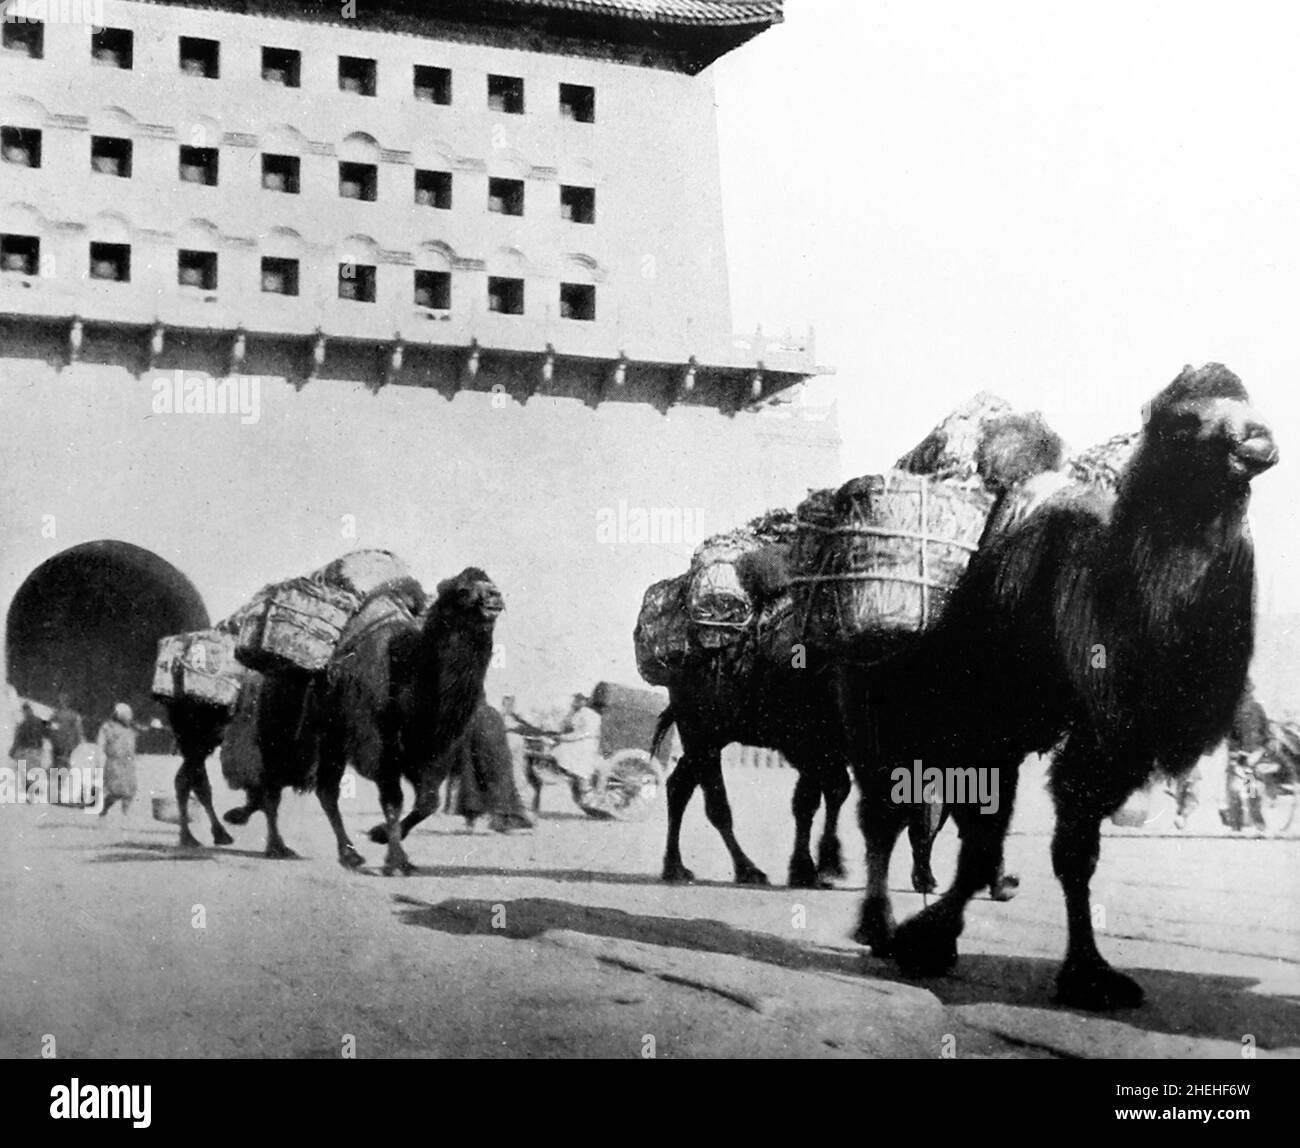 Camels transporting coal, Beijing, China, early 1900s Stock Photo